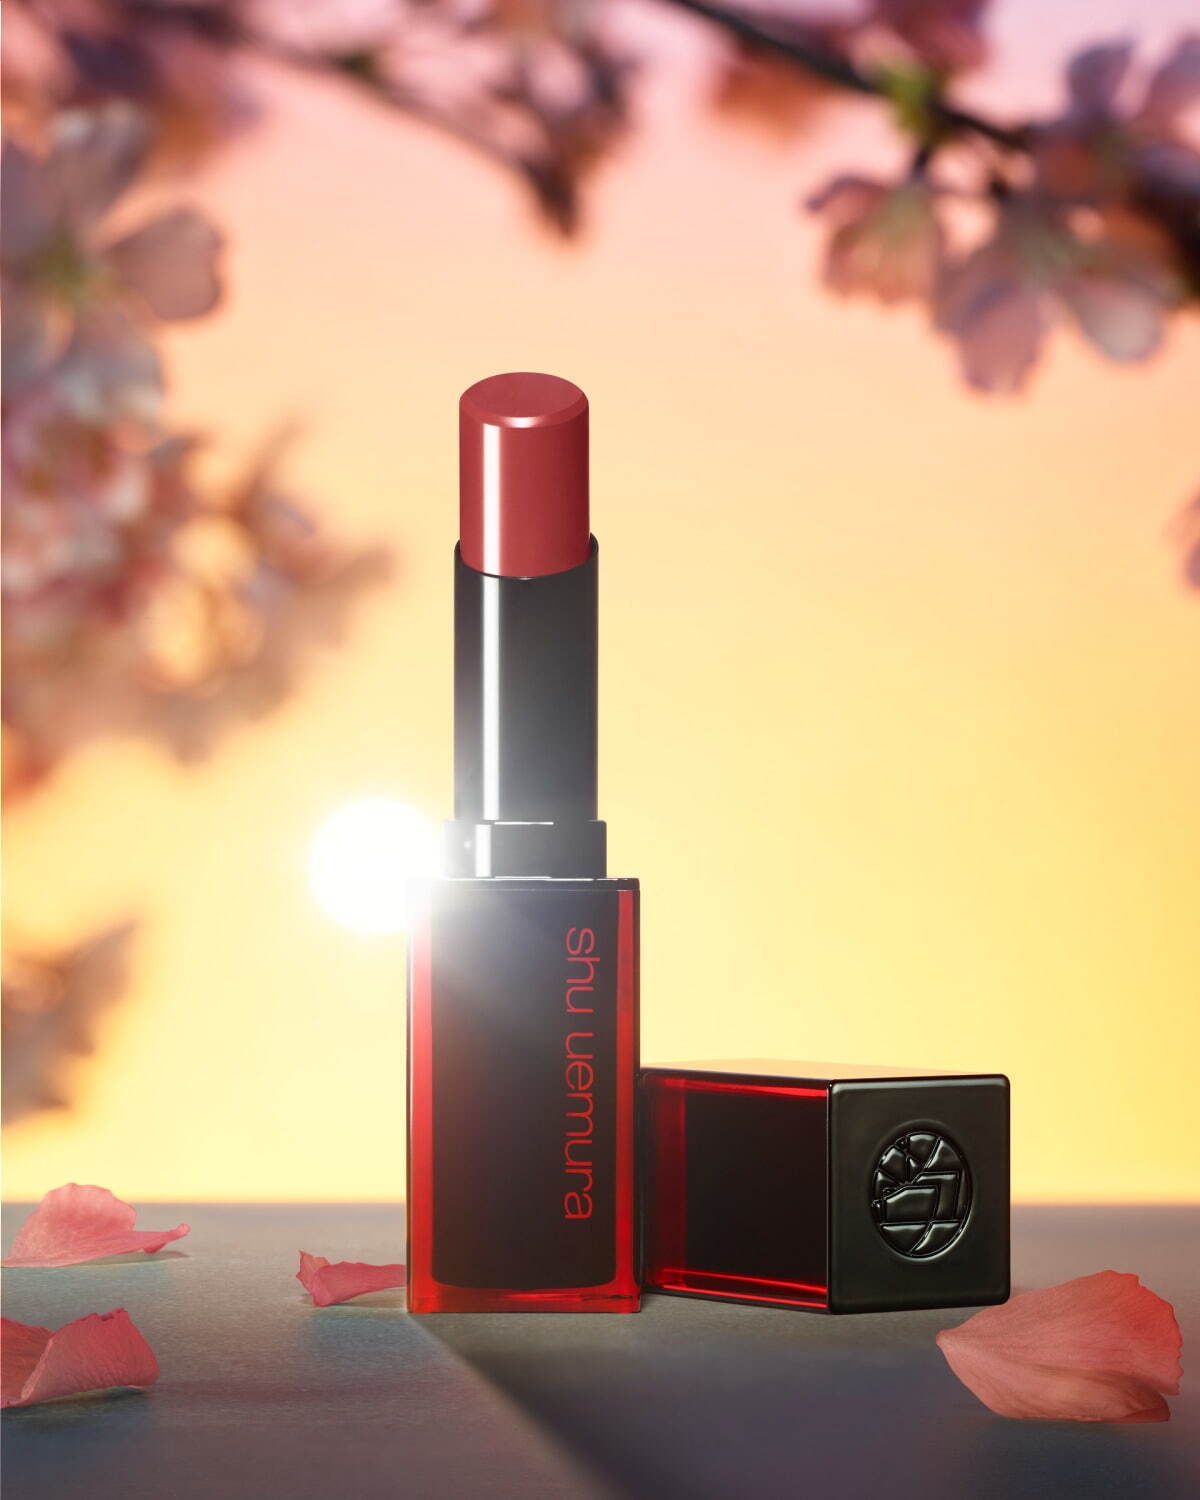 Shu Uemura’s Spring 2023 Beauty Collection